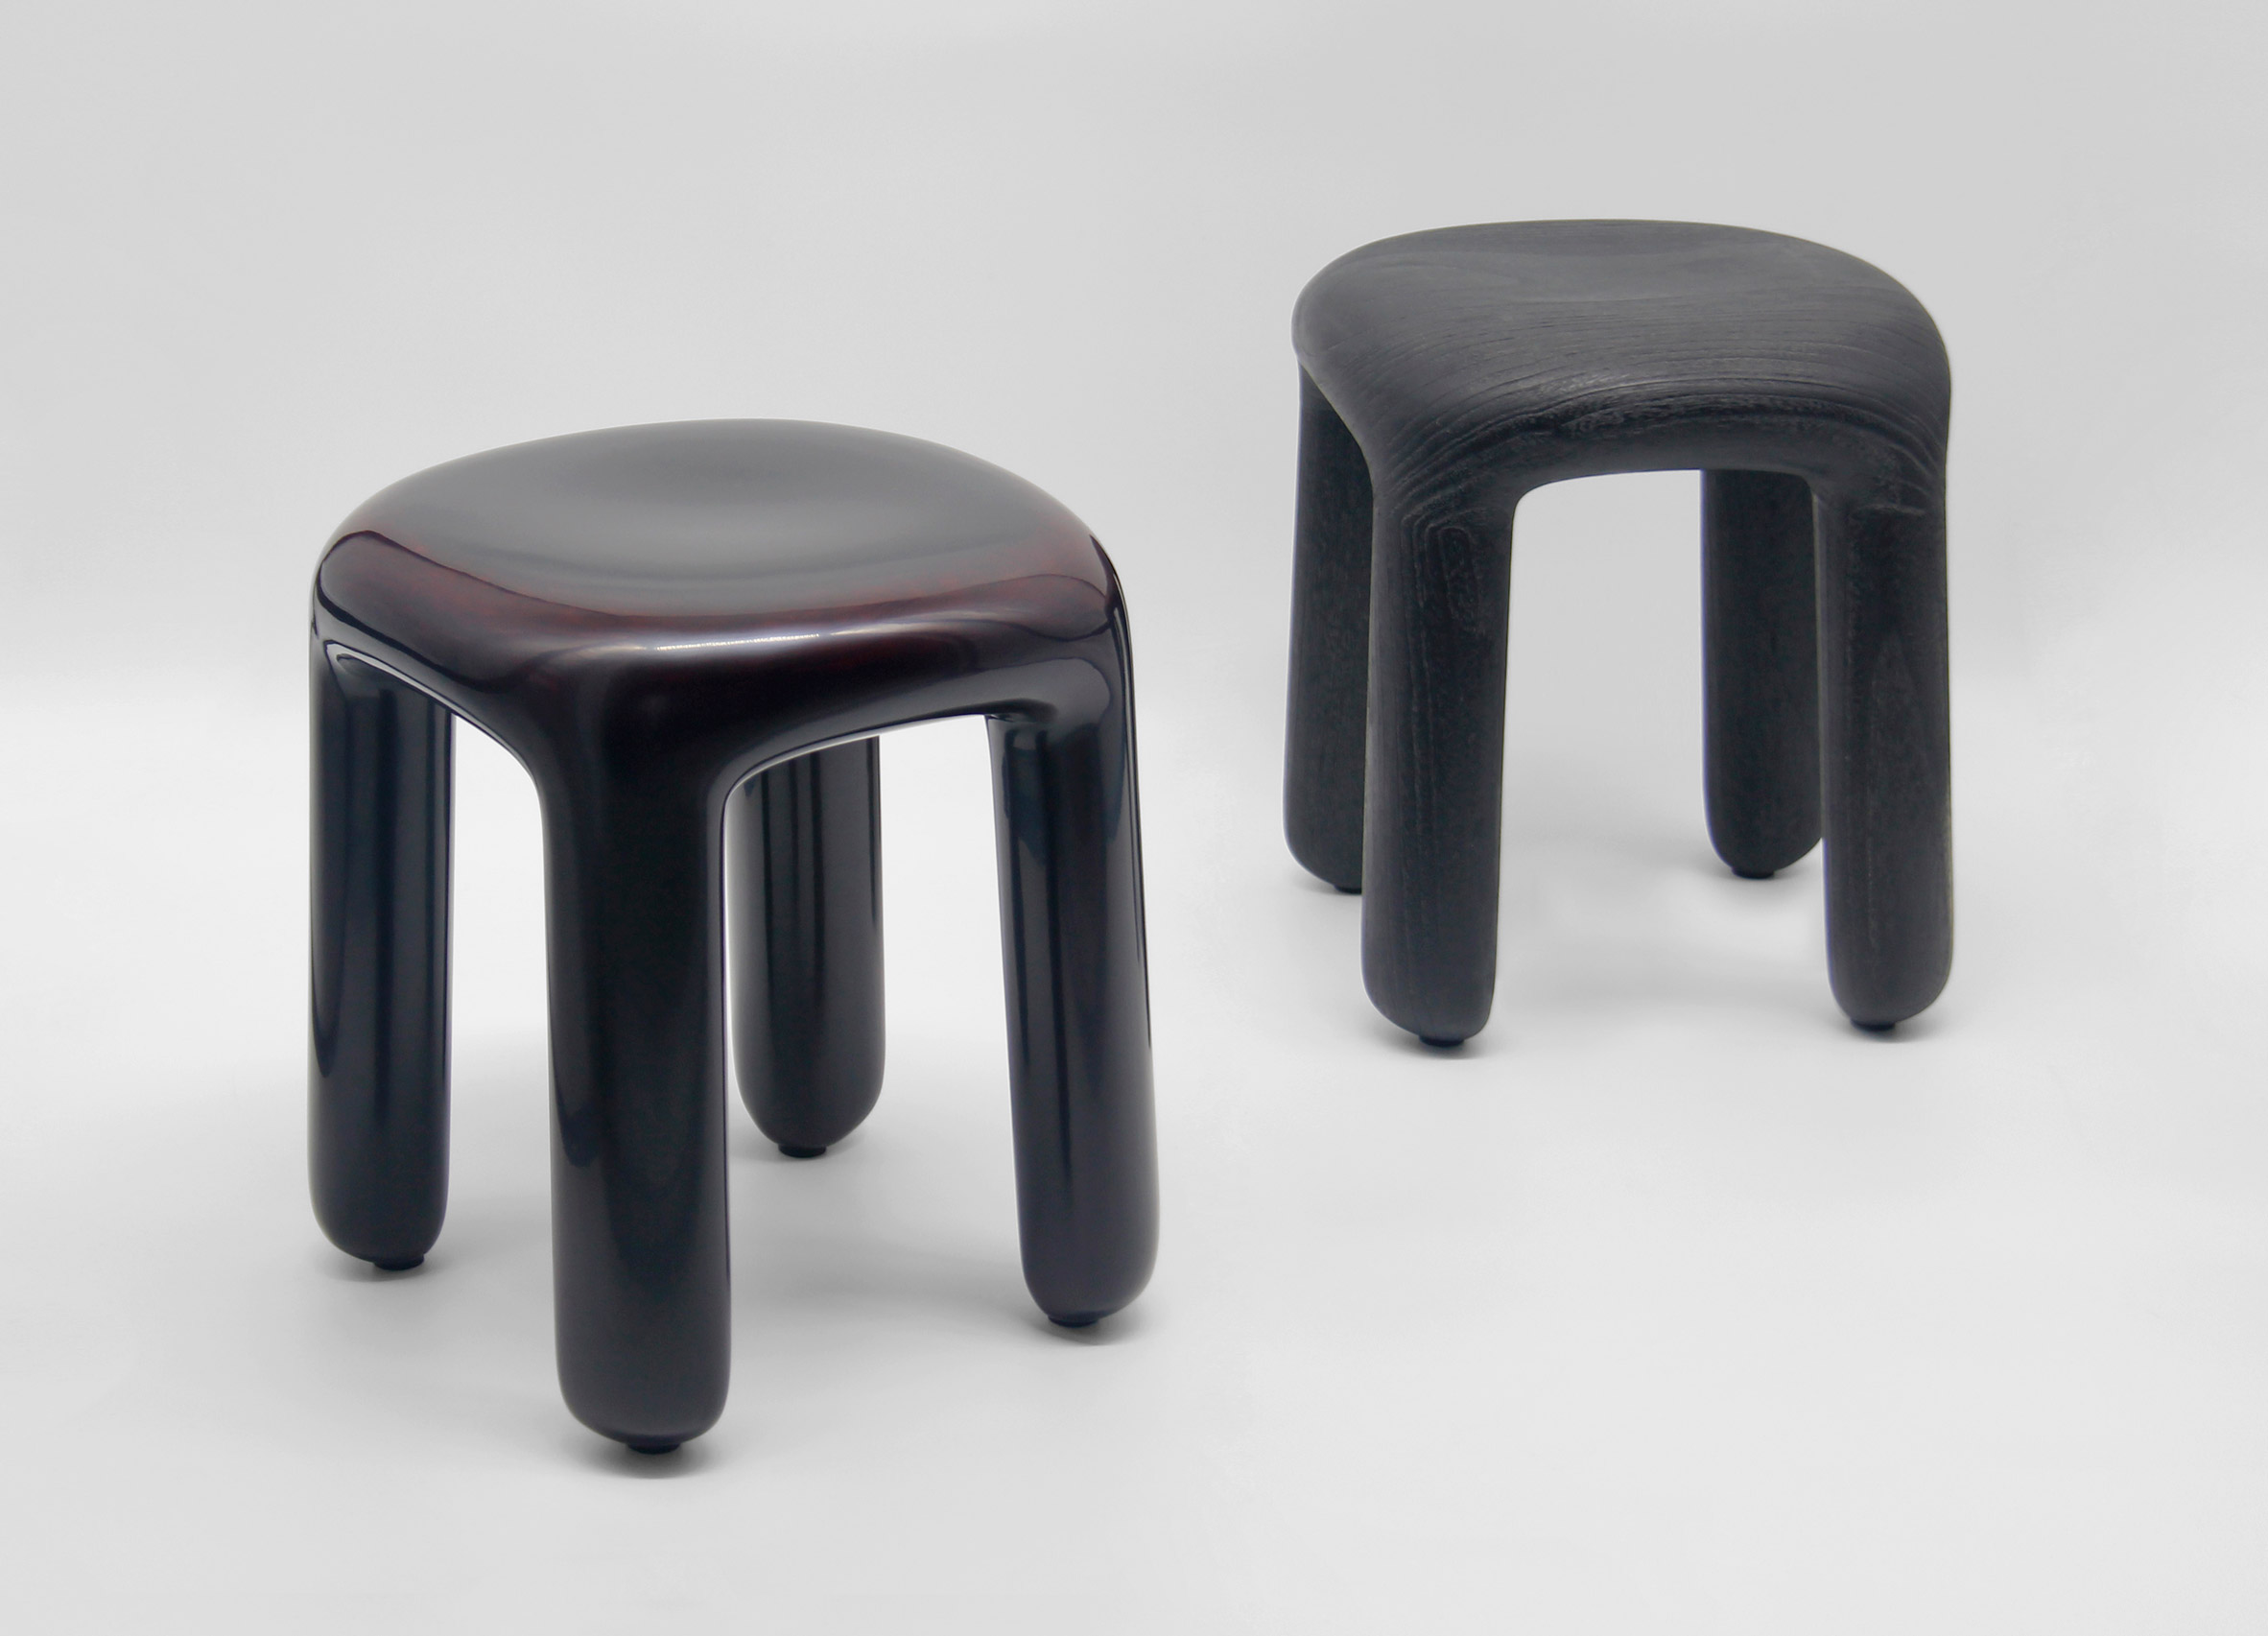 Ming Design Studio created its Bold stool series using wood coated in lacquer